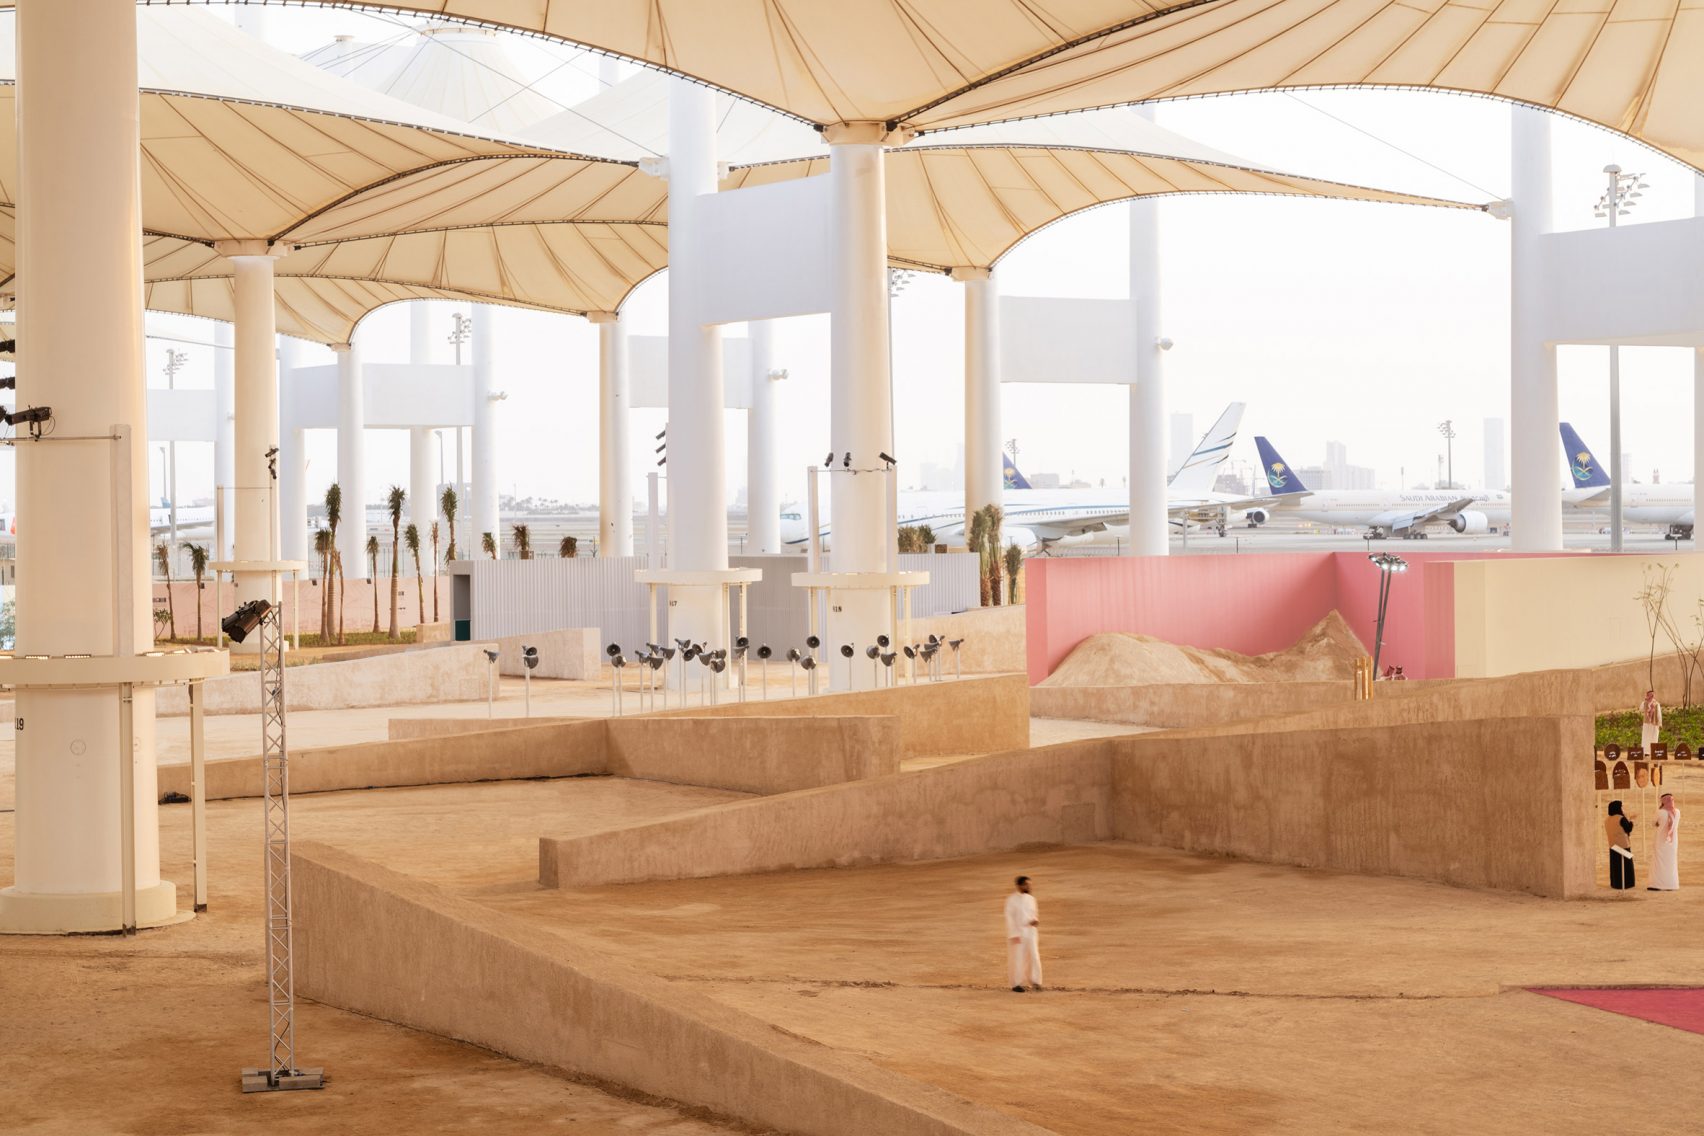 Oma Produces Scenography For Islamic Arts Biennale Inside Of Jeddah